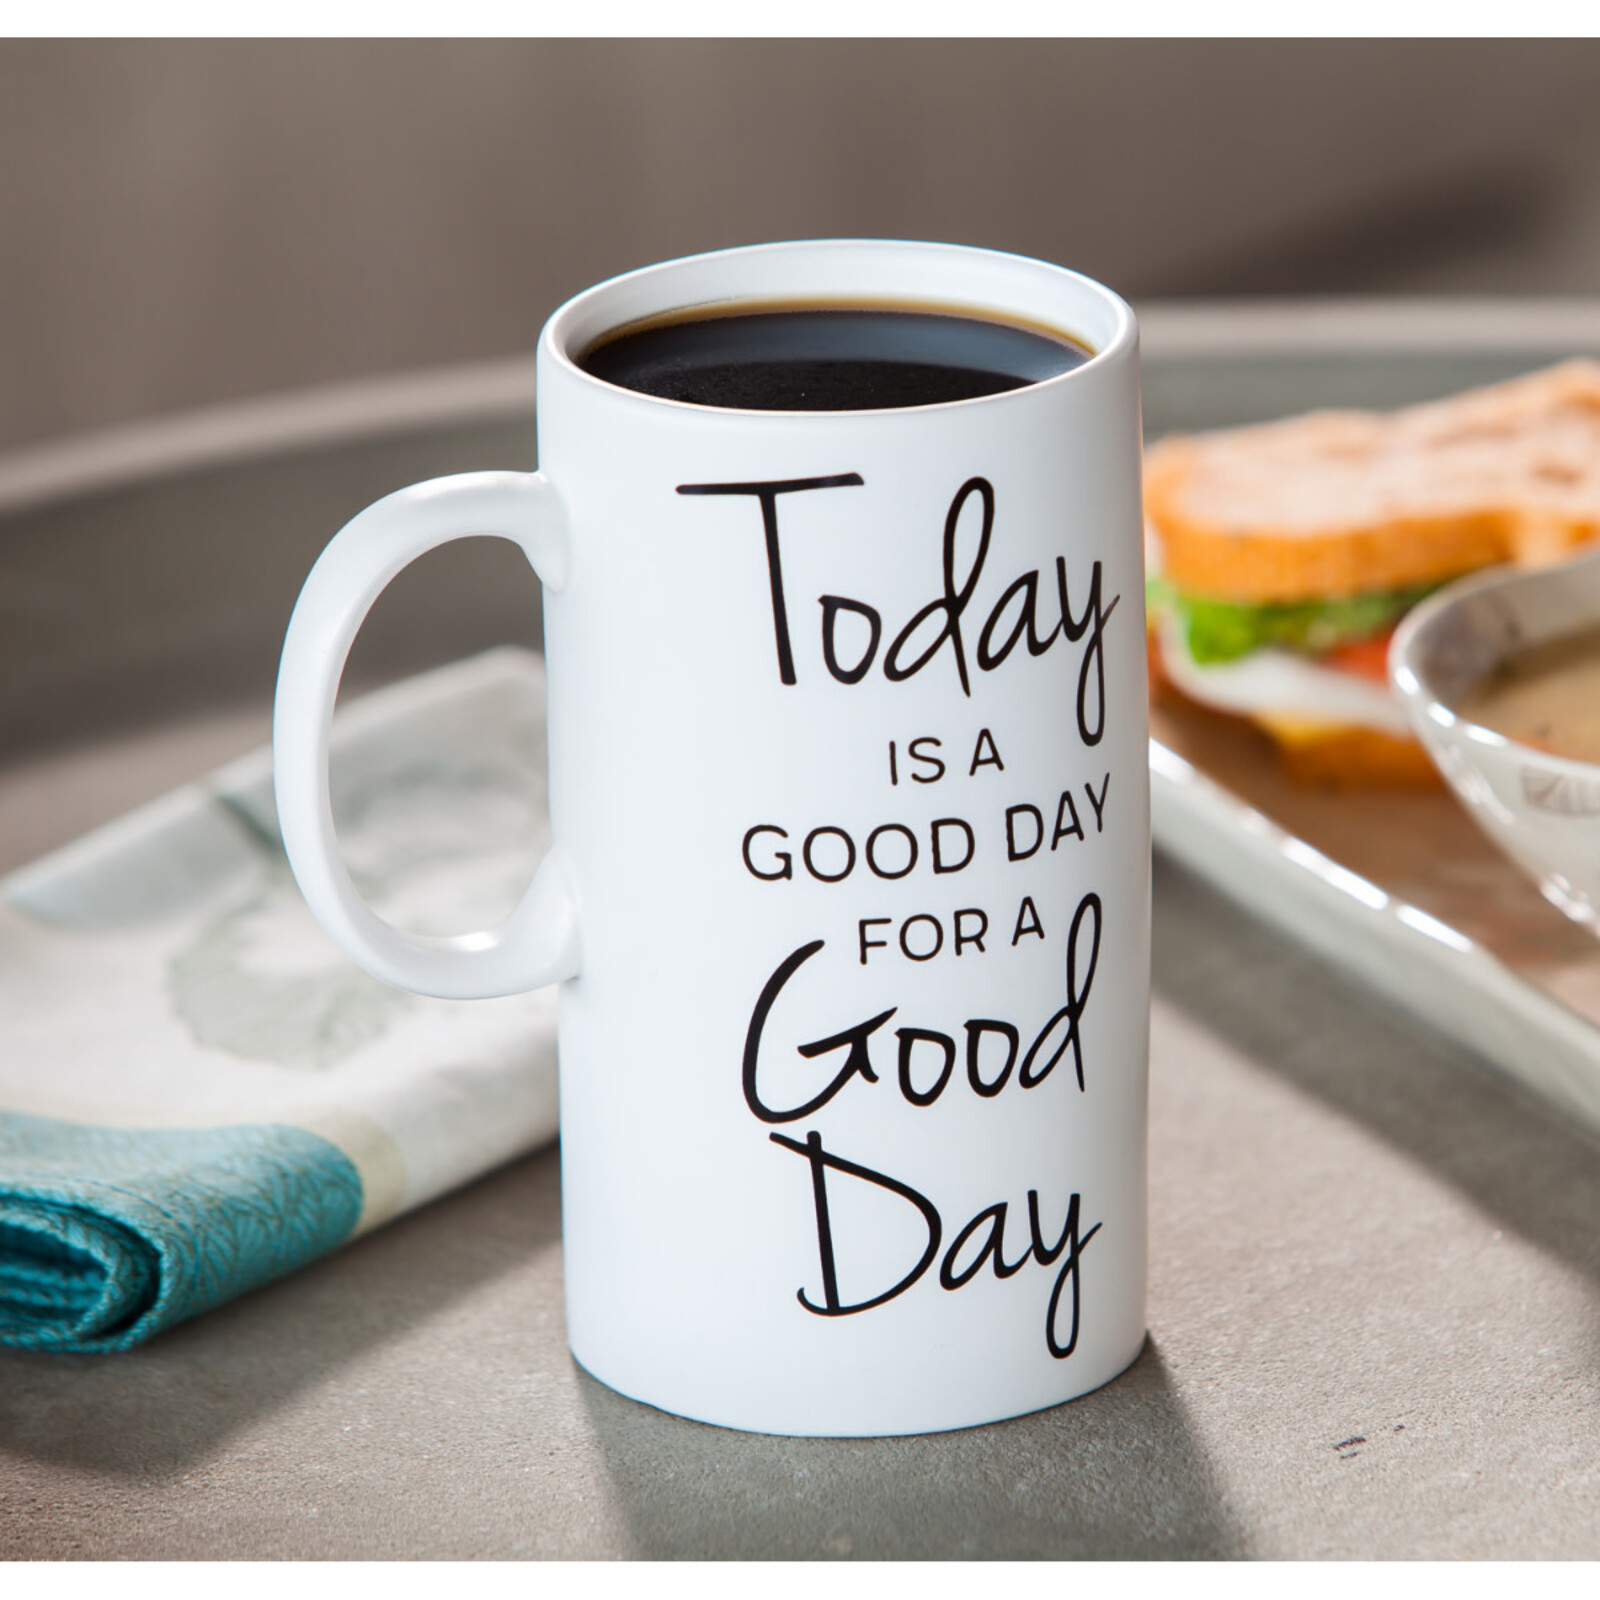 Evergreen Enterprises Ceramic Cup 20 oz Today is a Good Day 3TCT001 loading=